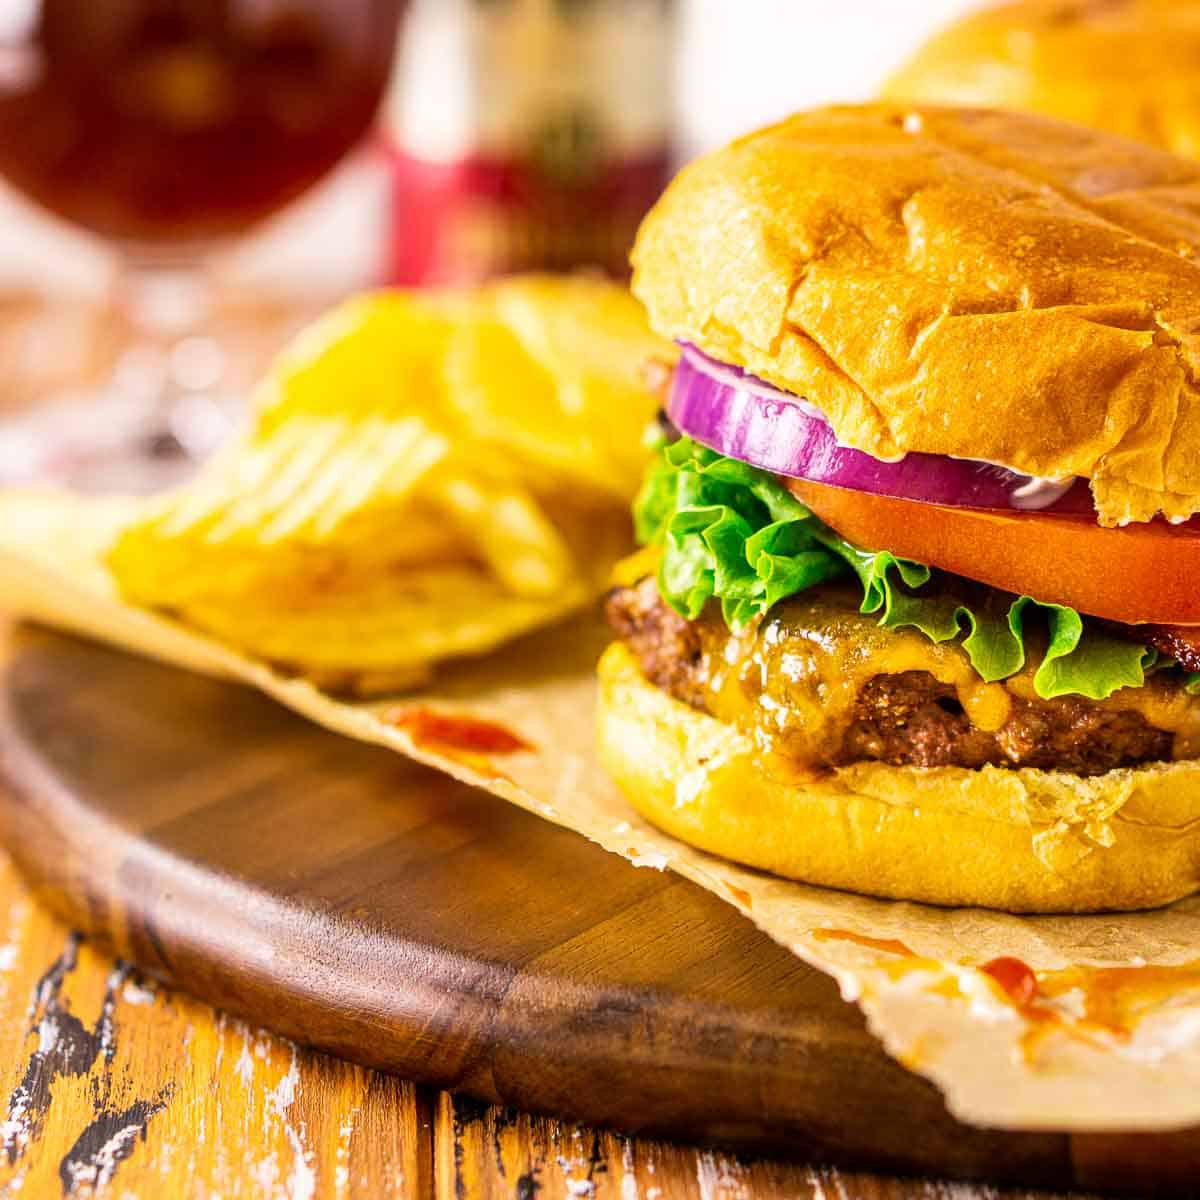 All American Grilled Burgers - Hey Grill, Hey